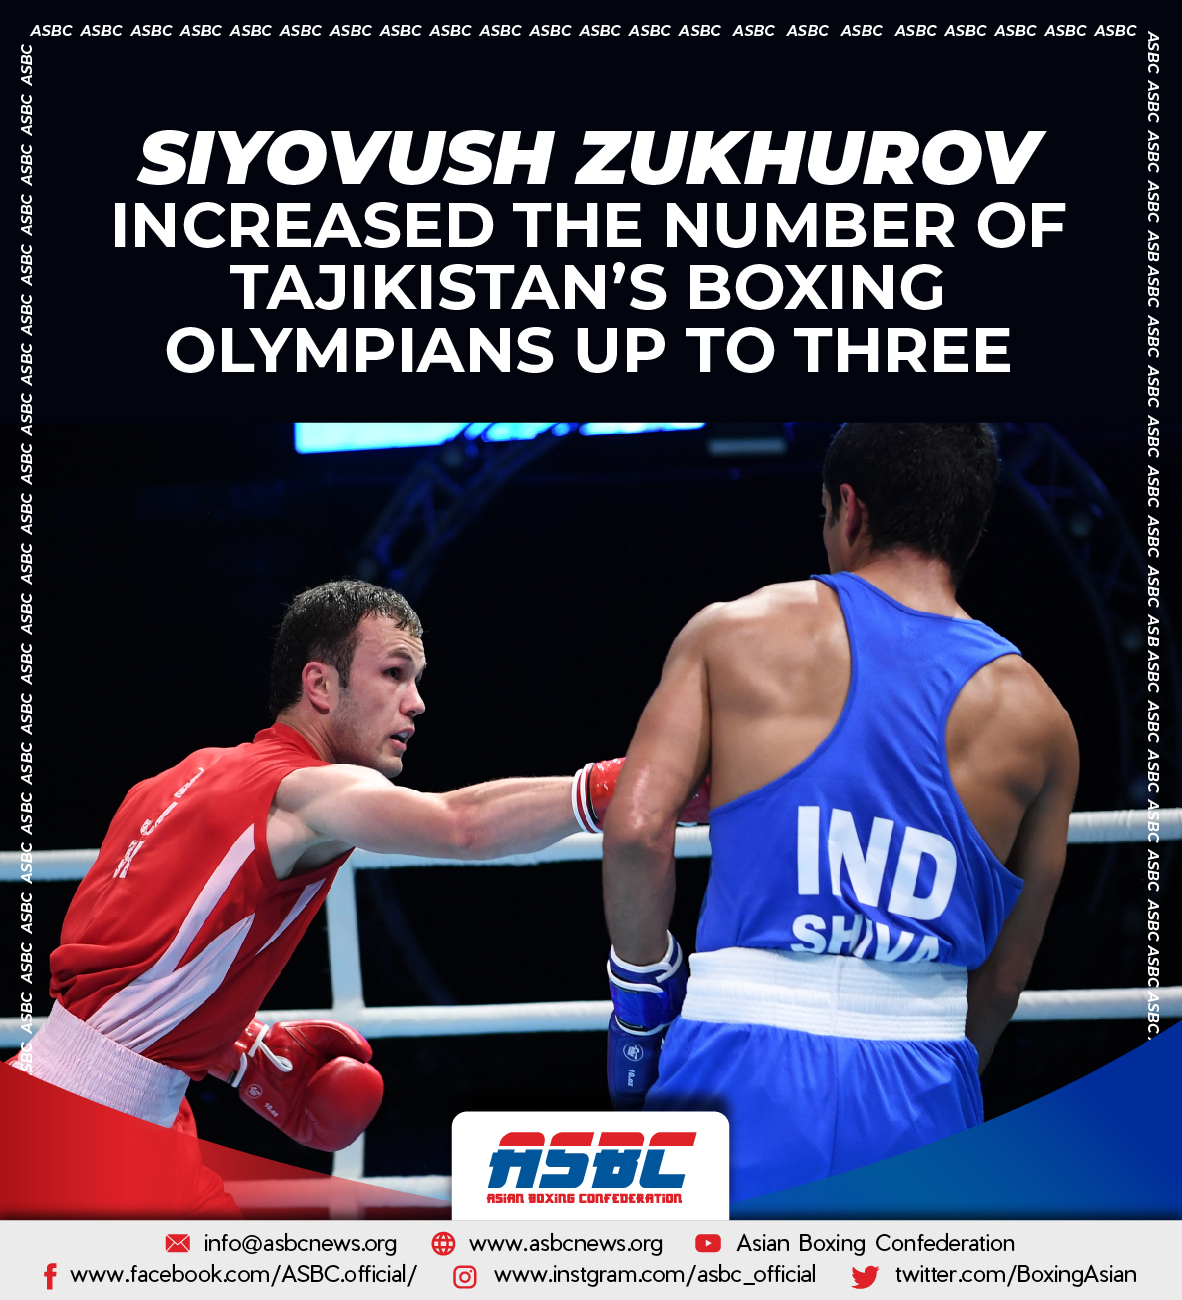 Siyovush Zukhurov increased the number of Tajikistans boxing Olympians up to three ASBCNEWS